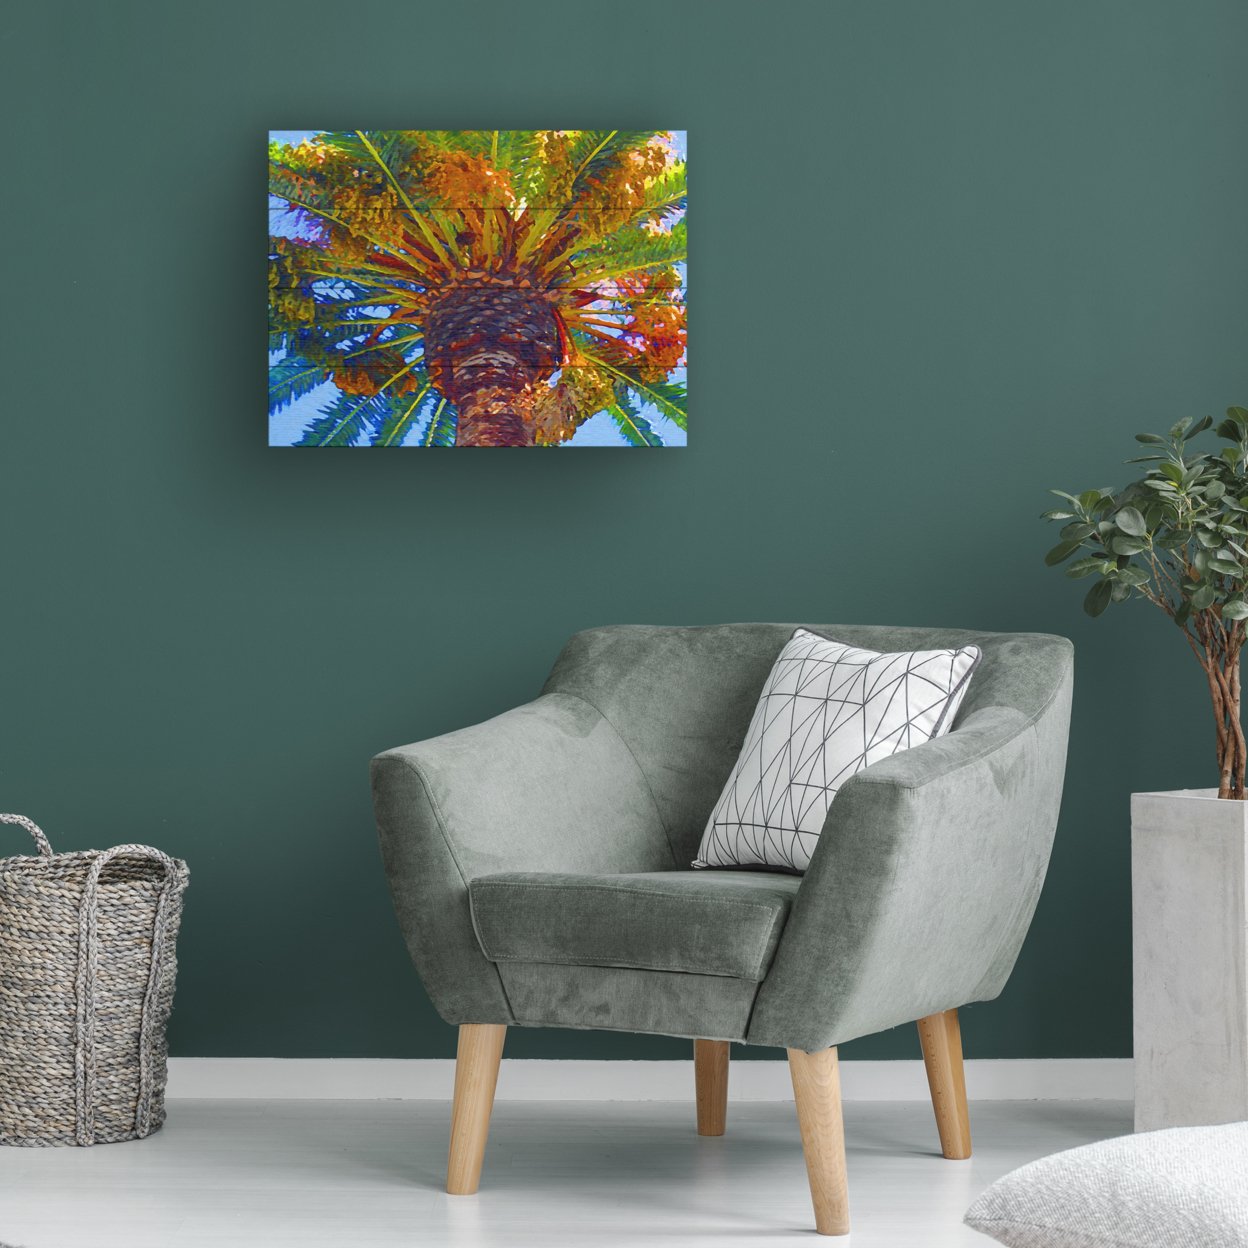 Wall Art 12 X 16 Inches Titled Palm Tree Looking Up Ready To Hang Printed On Wooden Planks